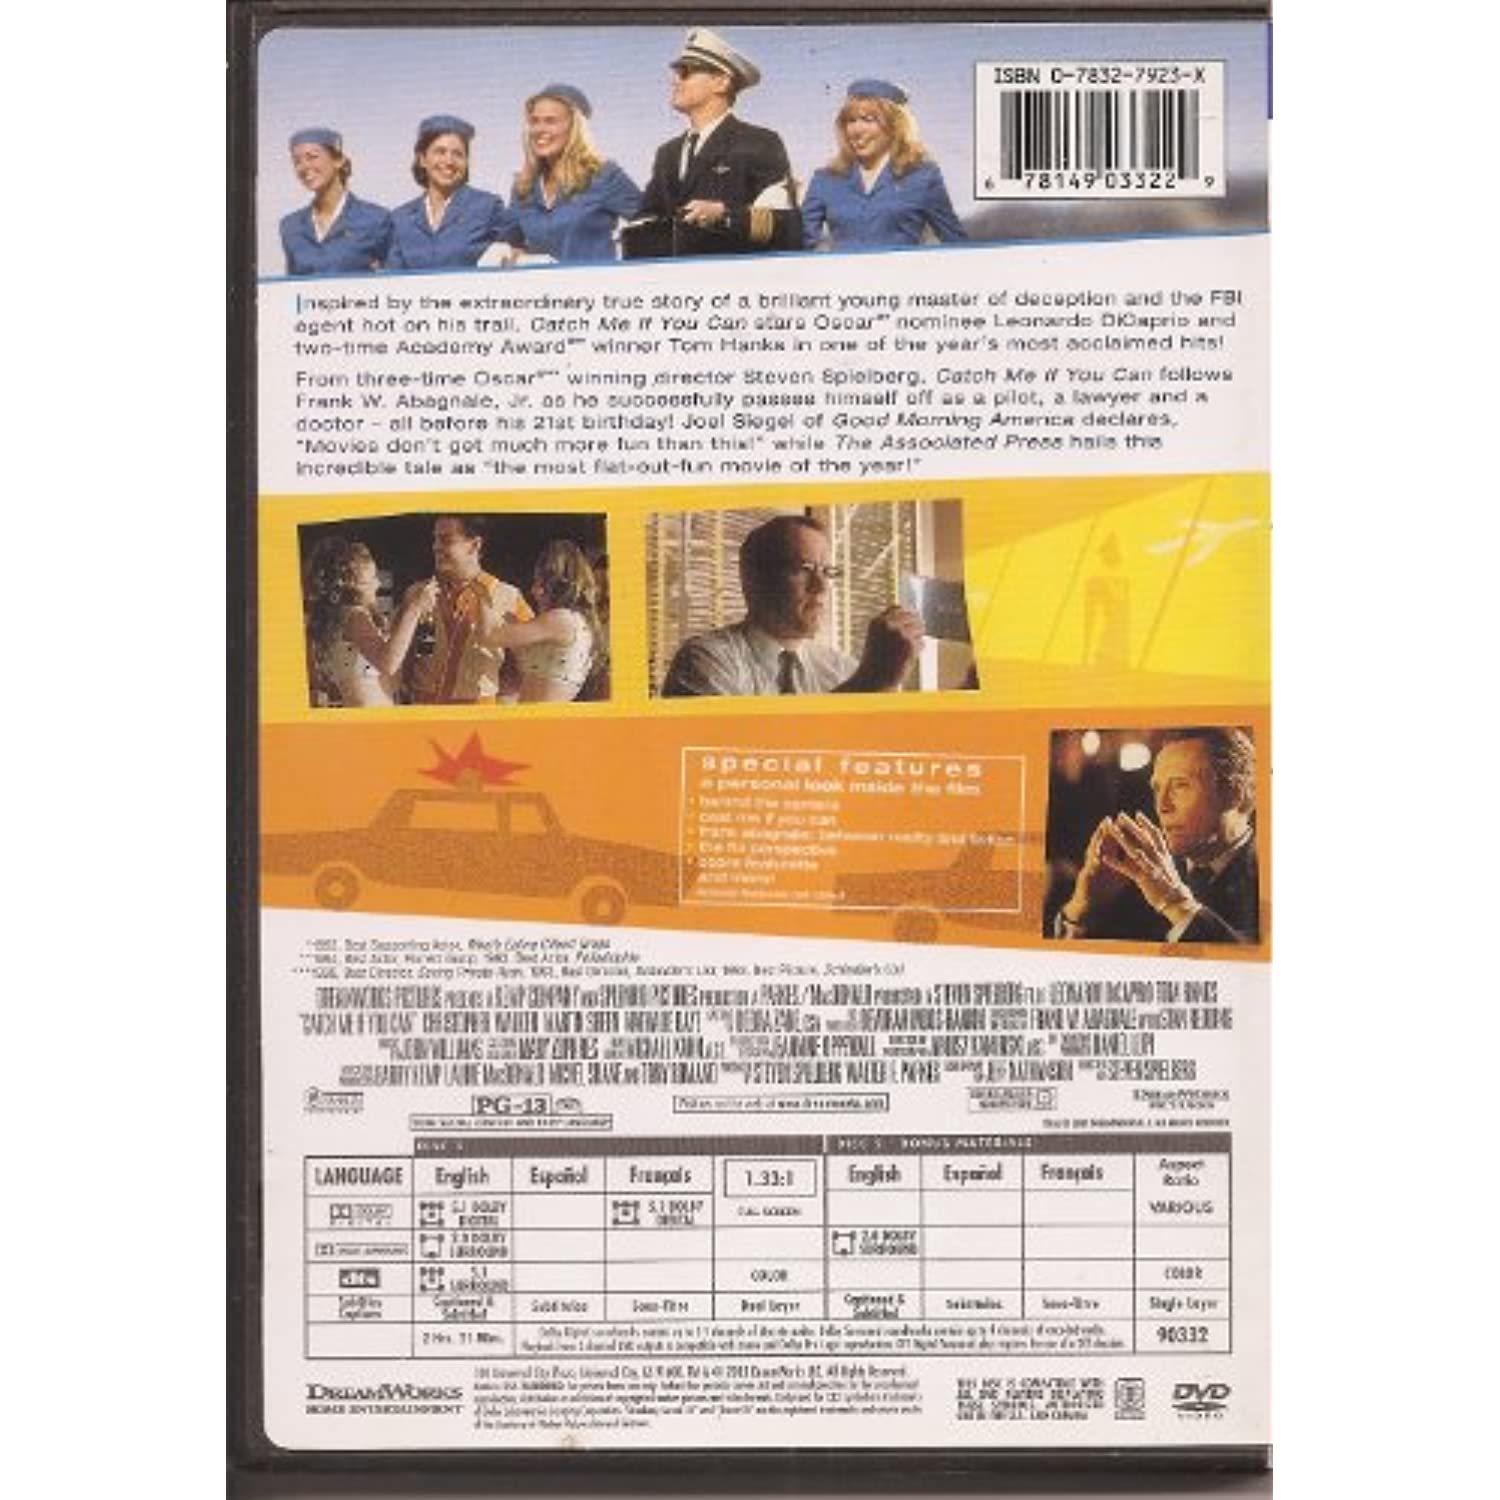 Catch Me If You Can (DVD), Dreamworks Video, Drama - image 2 of 2